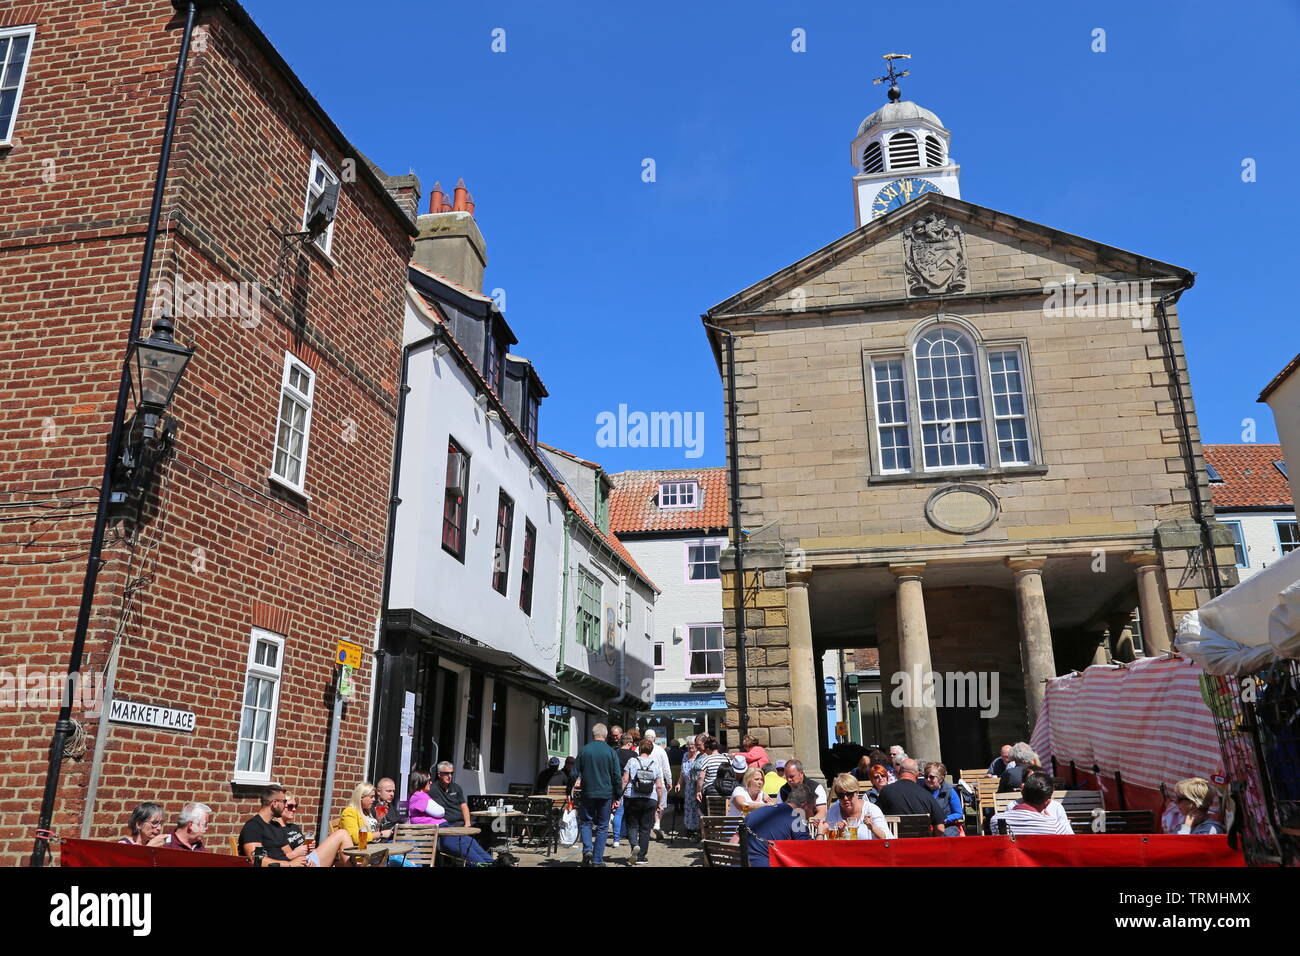 Old Town Hall, Market Place, Whitby, Borough of Scarborough, North Yorkshire, England, Great Britain, United Kingdom, UK, Europe Stock Photo